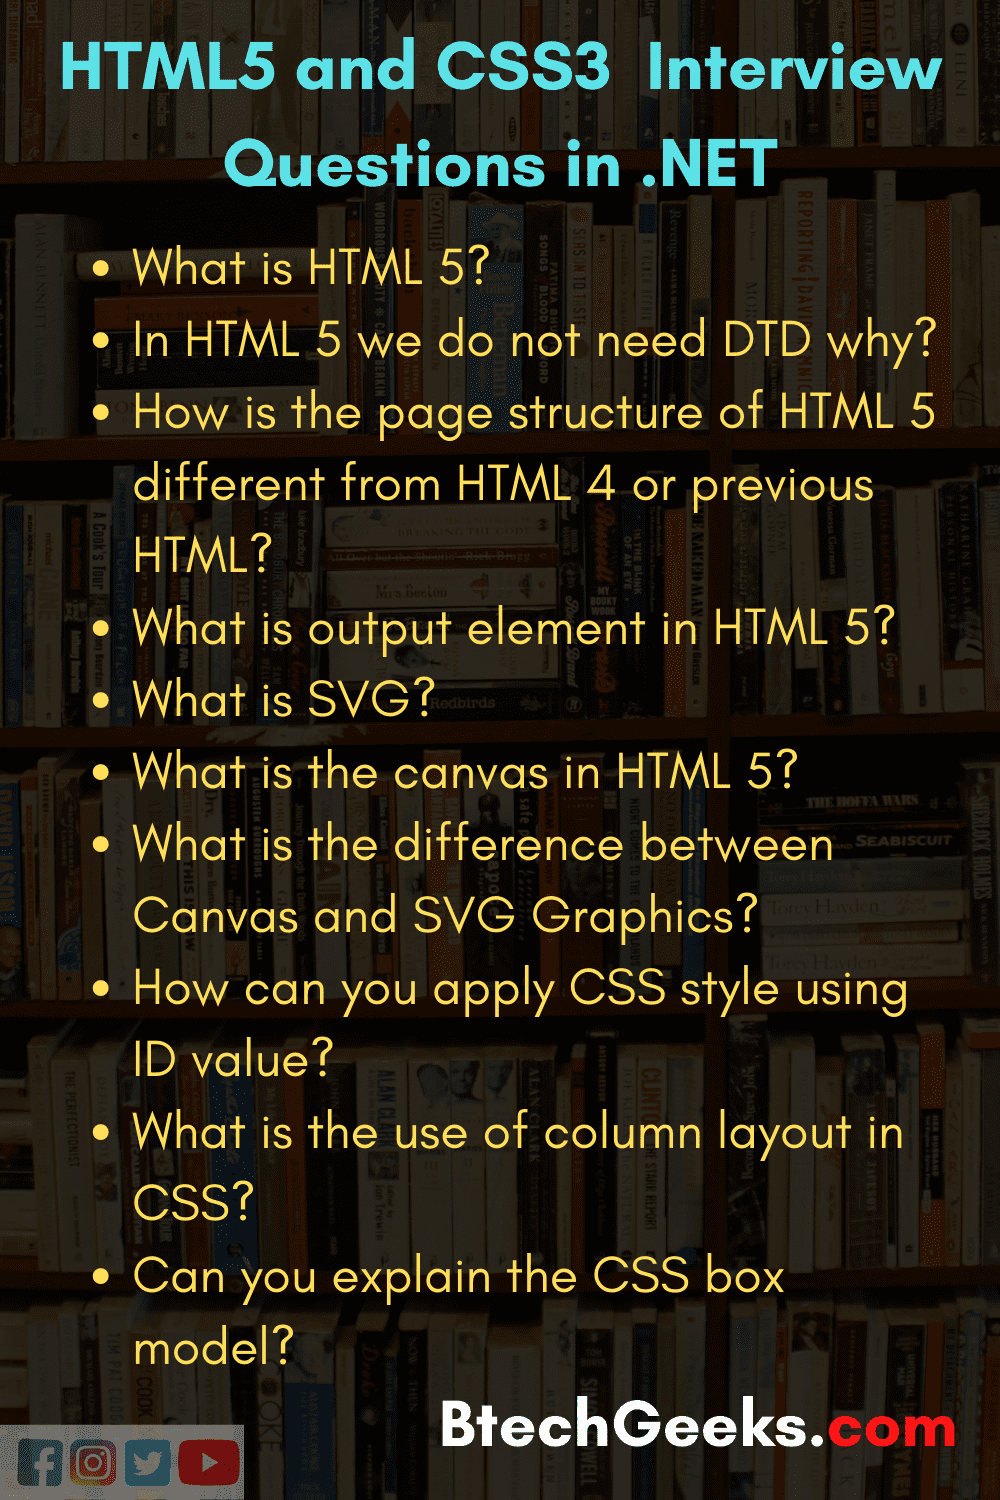 HTML 5 and CSS 3 Interview Questions in .NET